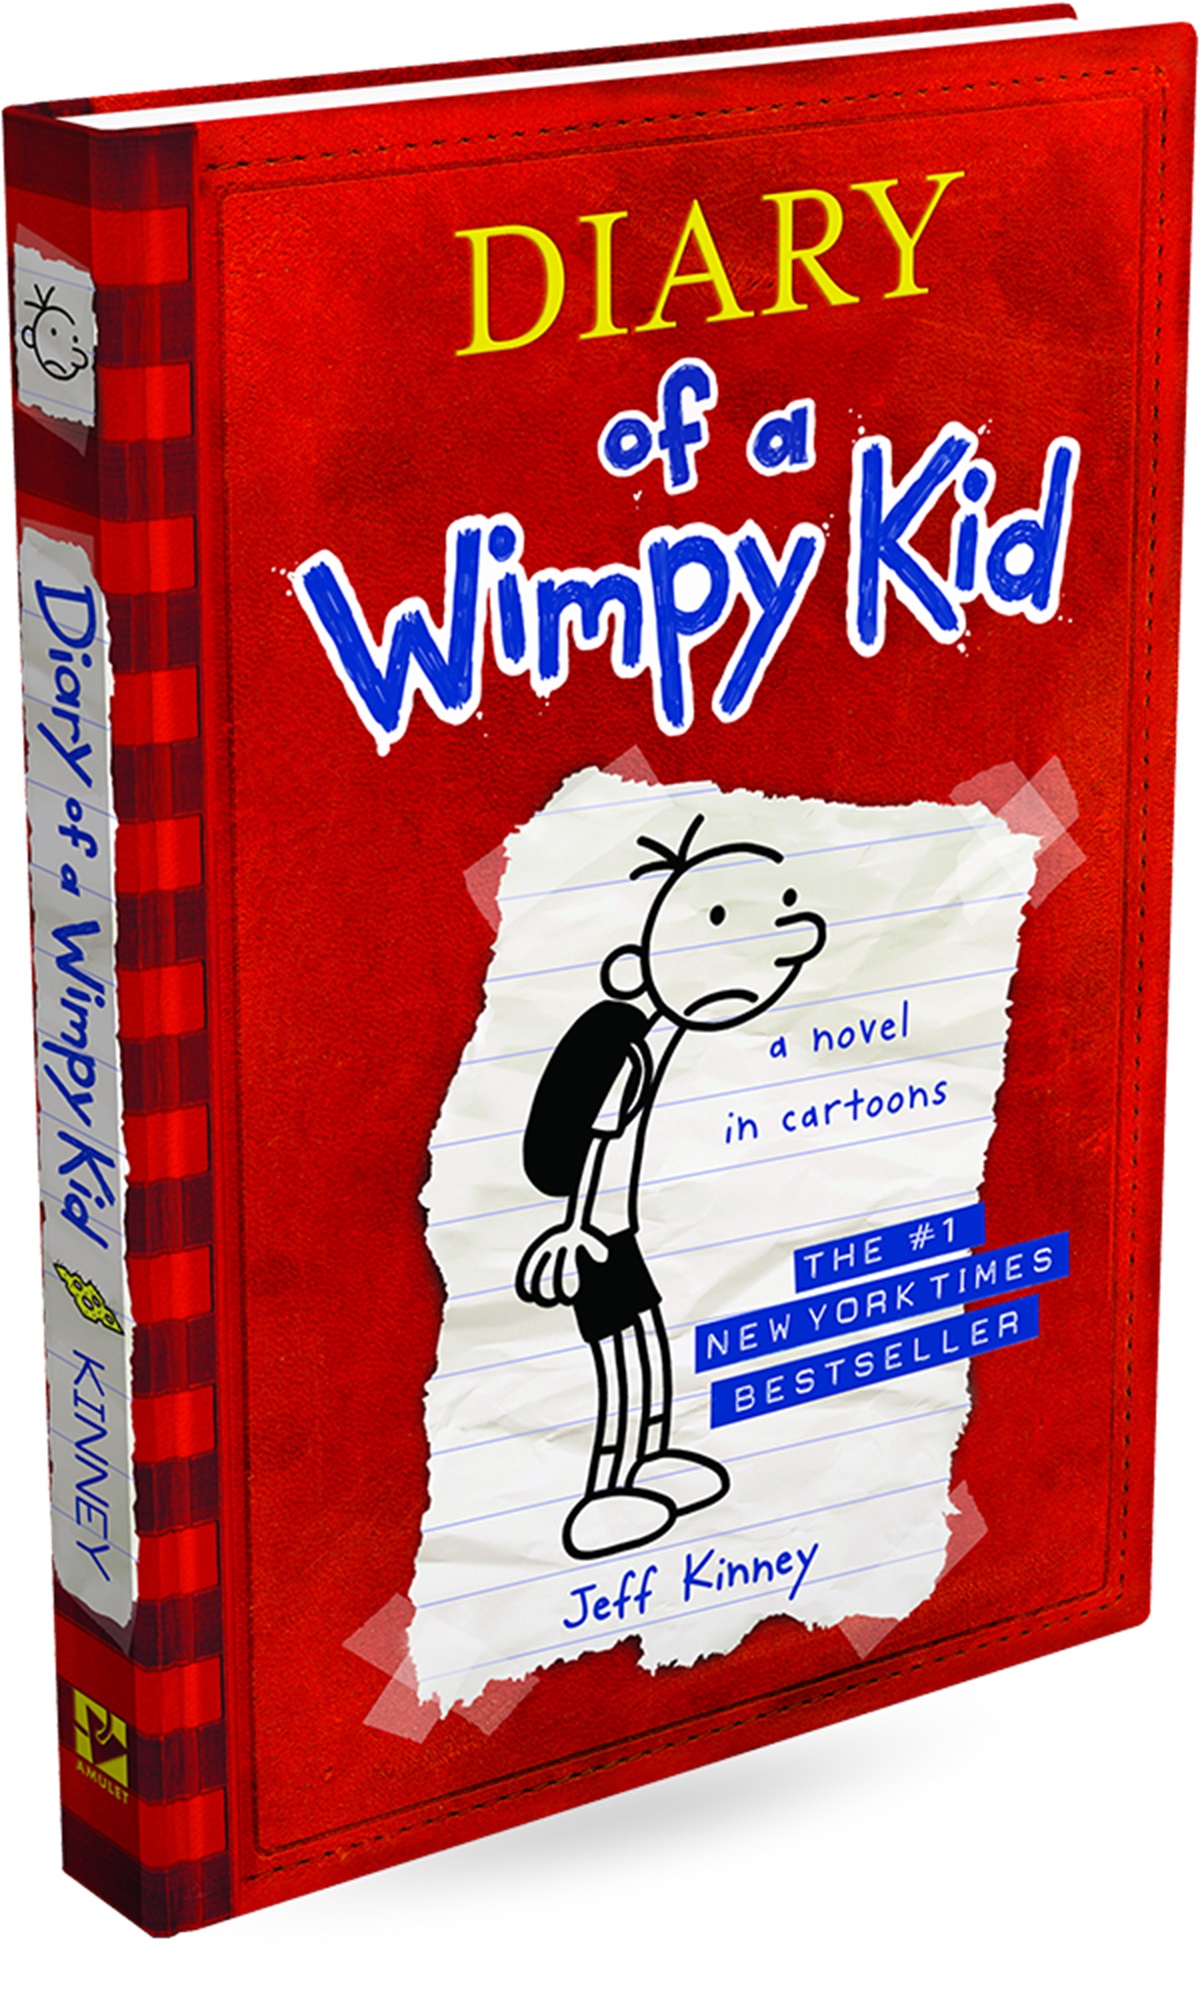 All Diary Of A Wimpy Kid Books in Order